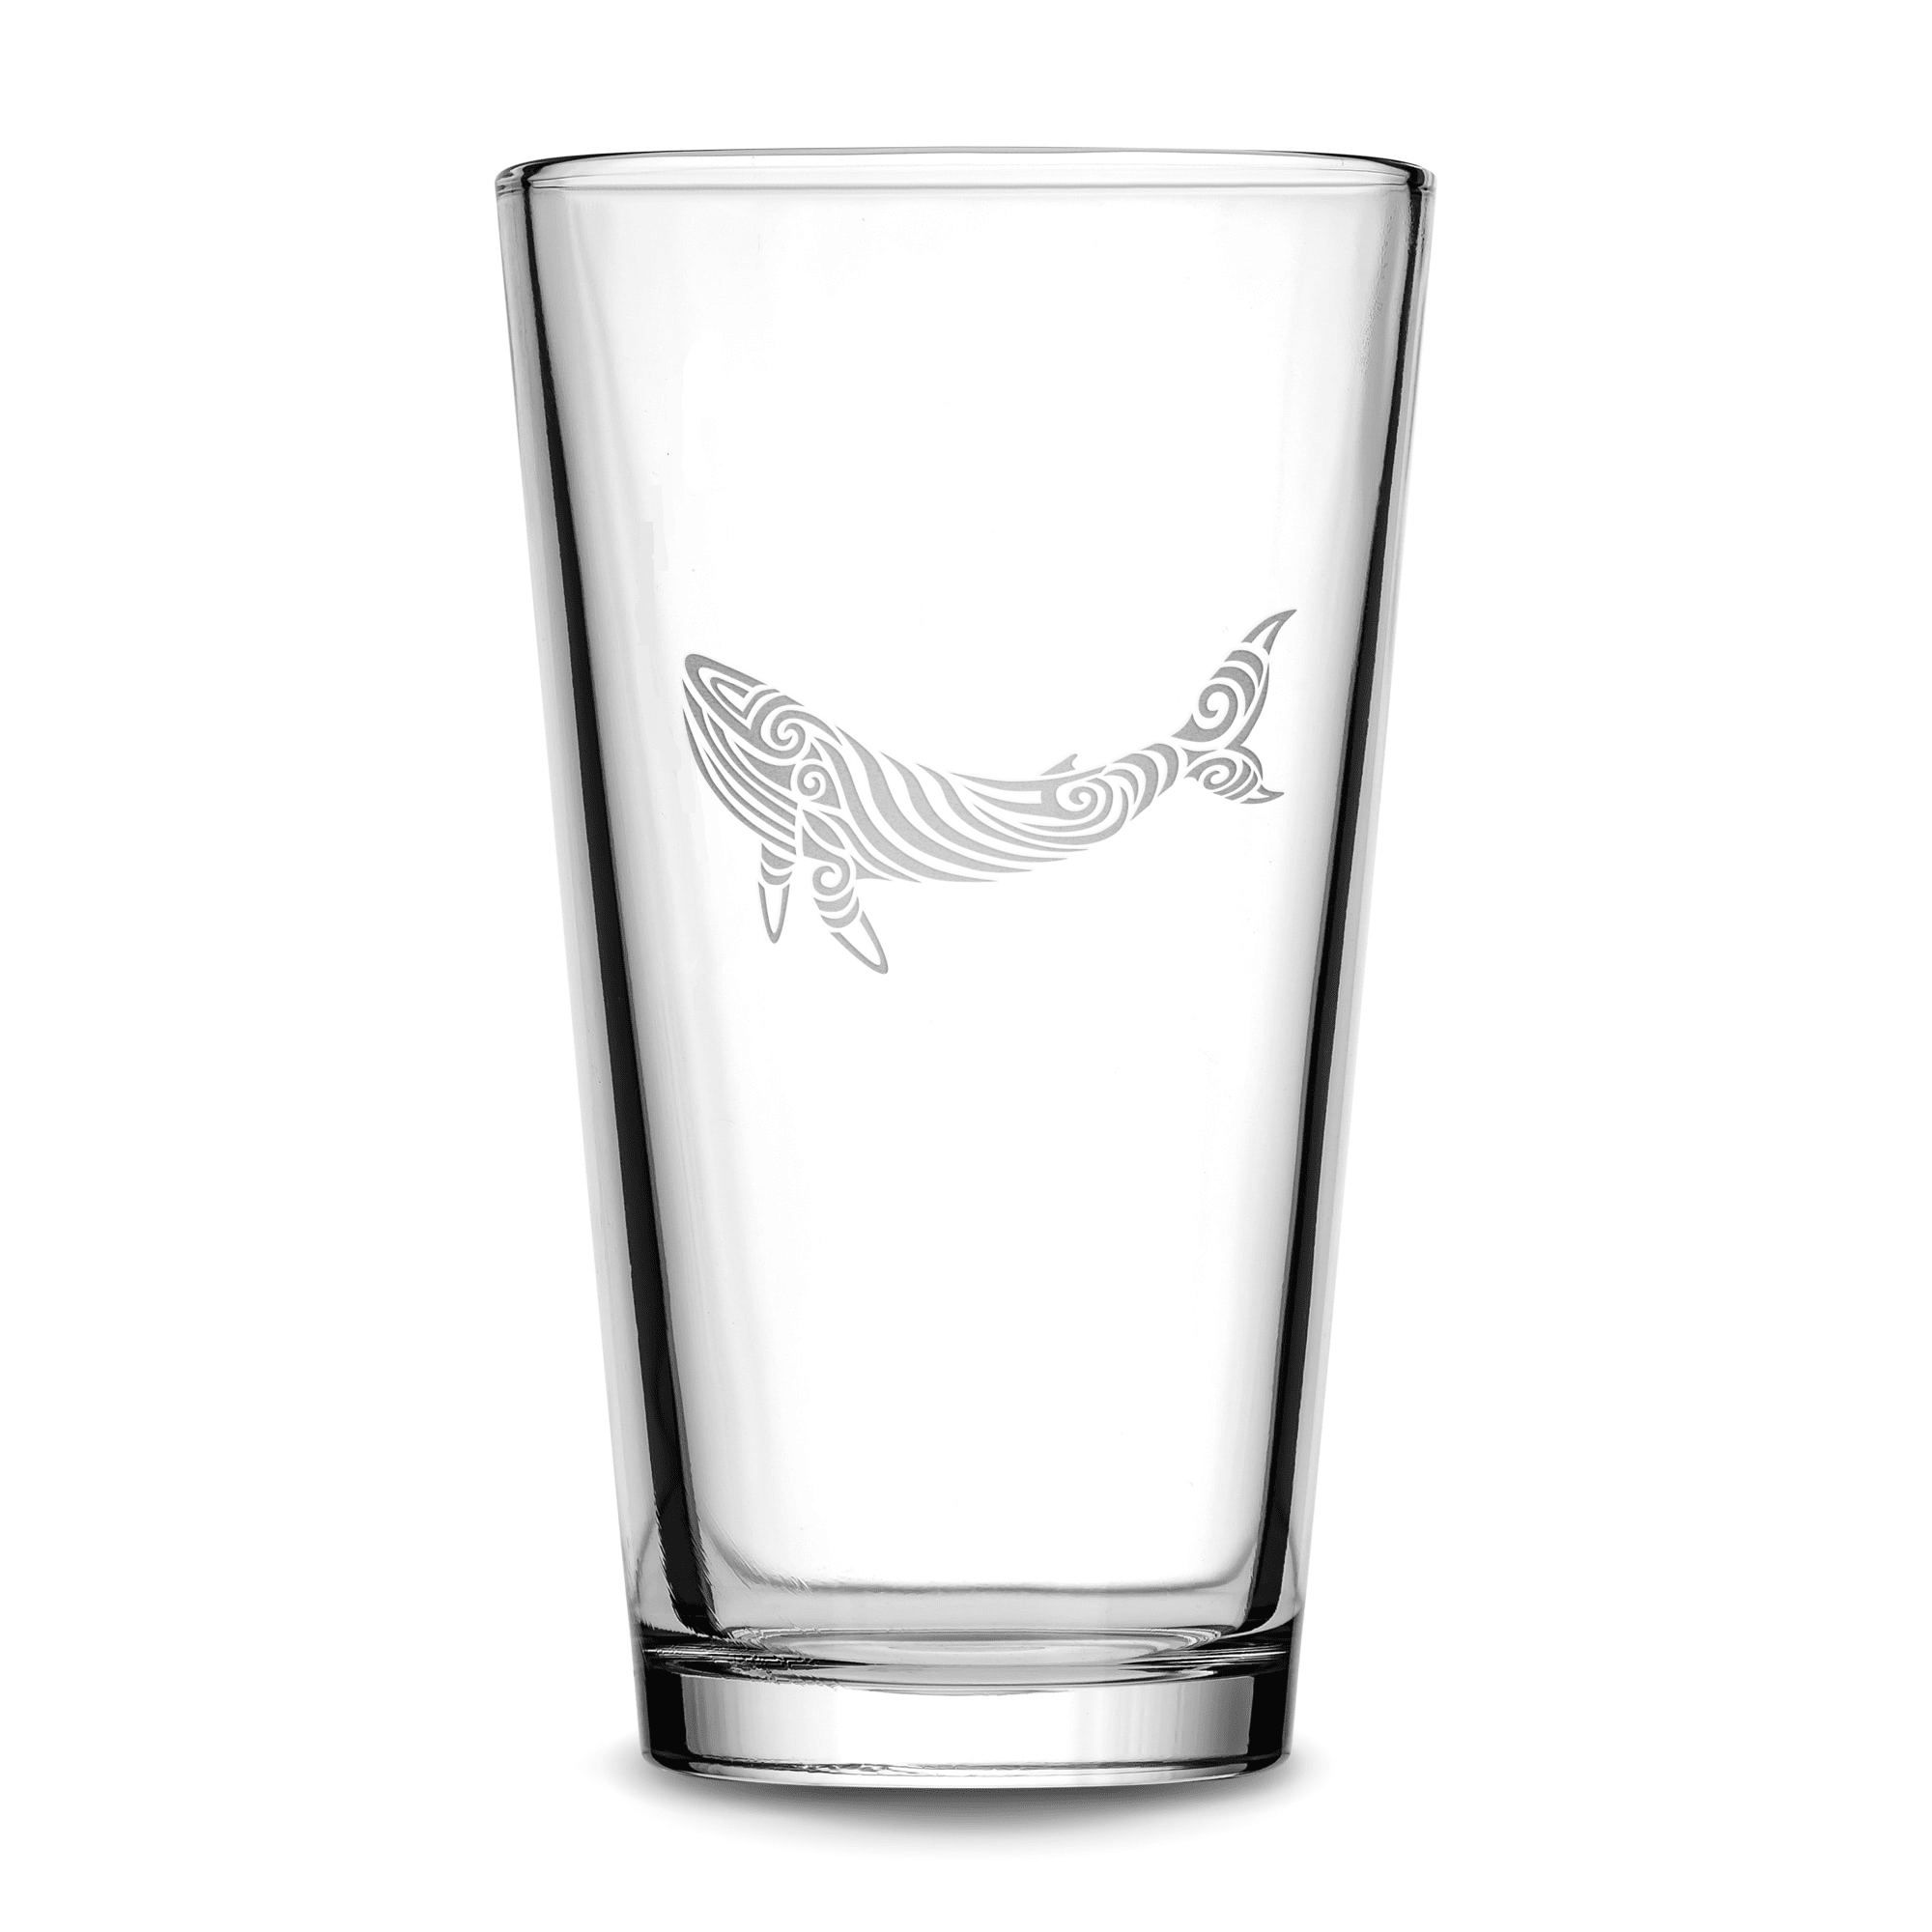 Premium Pint Glass, Whale Design, Deep Etched, 16oz by Integrity Bottles